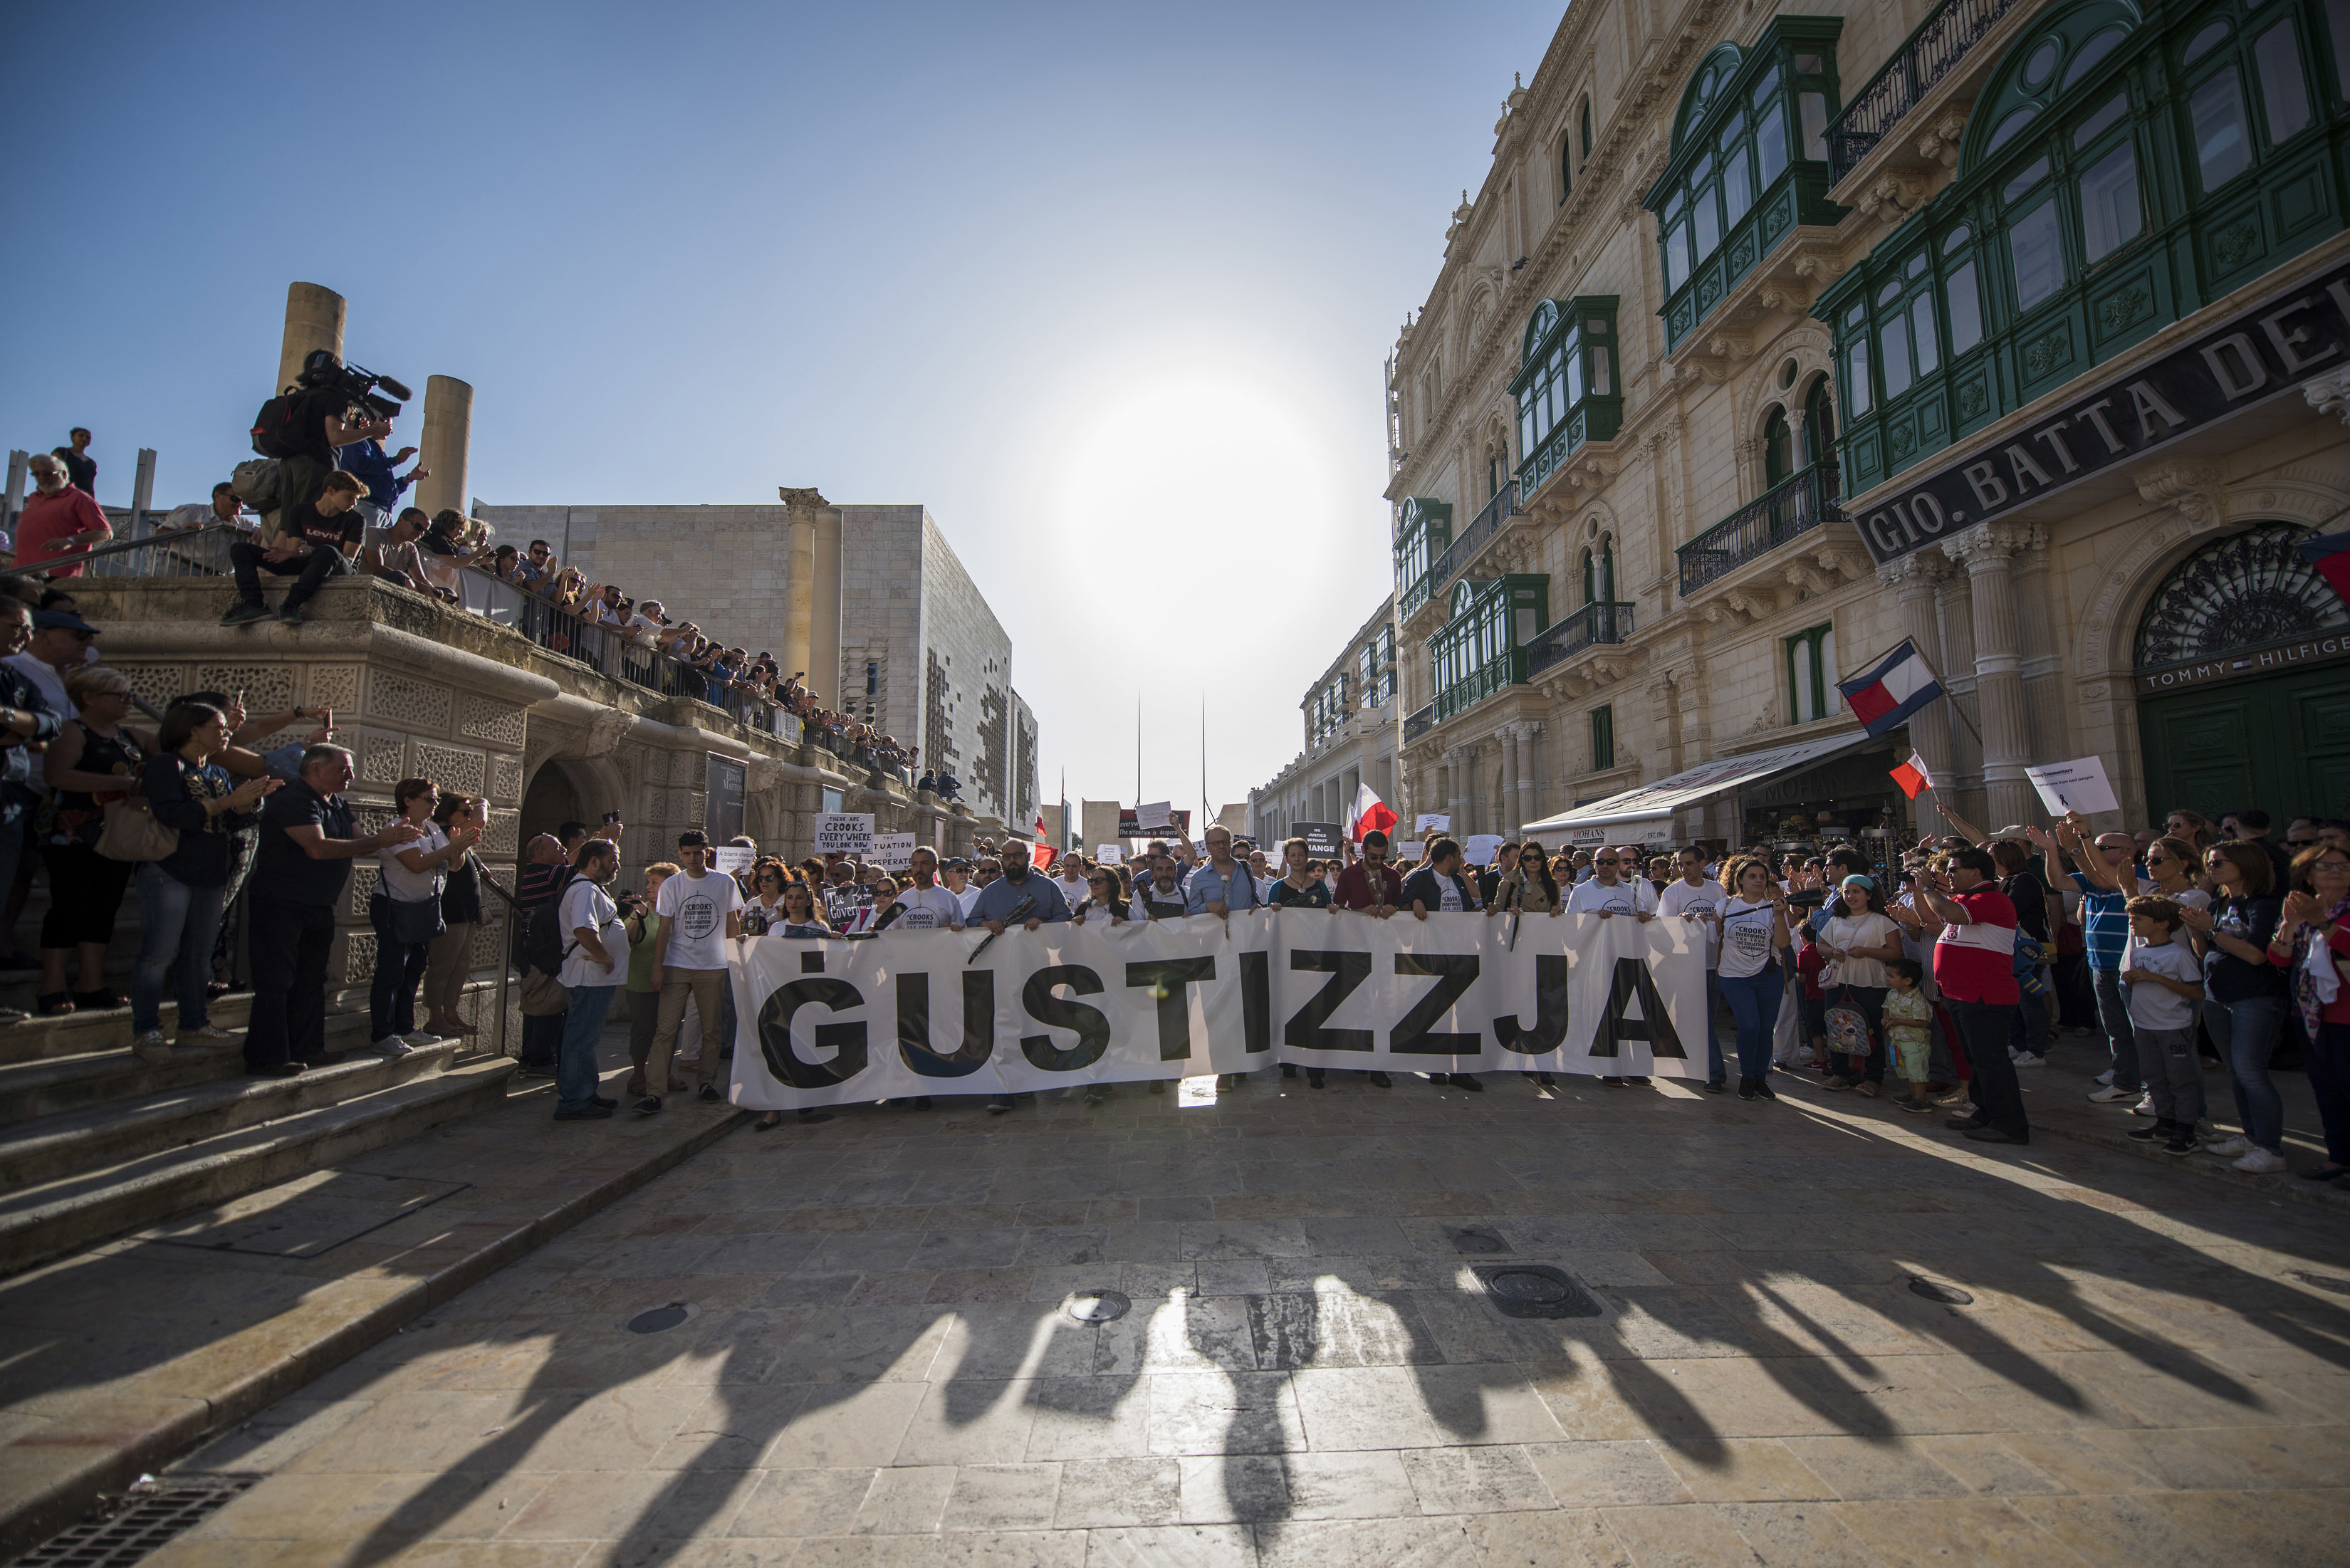 A banner reading "justice" is displayed at an October 2017 rally in Malta to honor investigative journalist Daphne Caruana Galizia, who was killed by a car bomb that month. Forbidden Stories has collaborated with several news organizations and journalists to complete some of Caruana Galizia’s unfinished stories